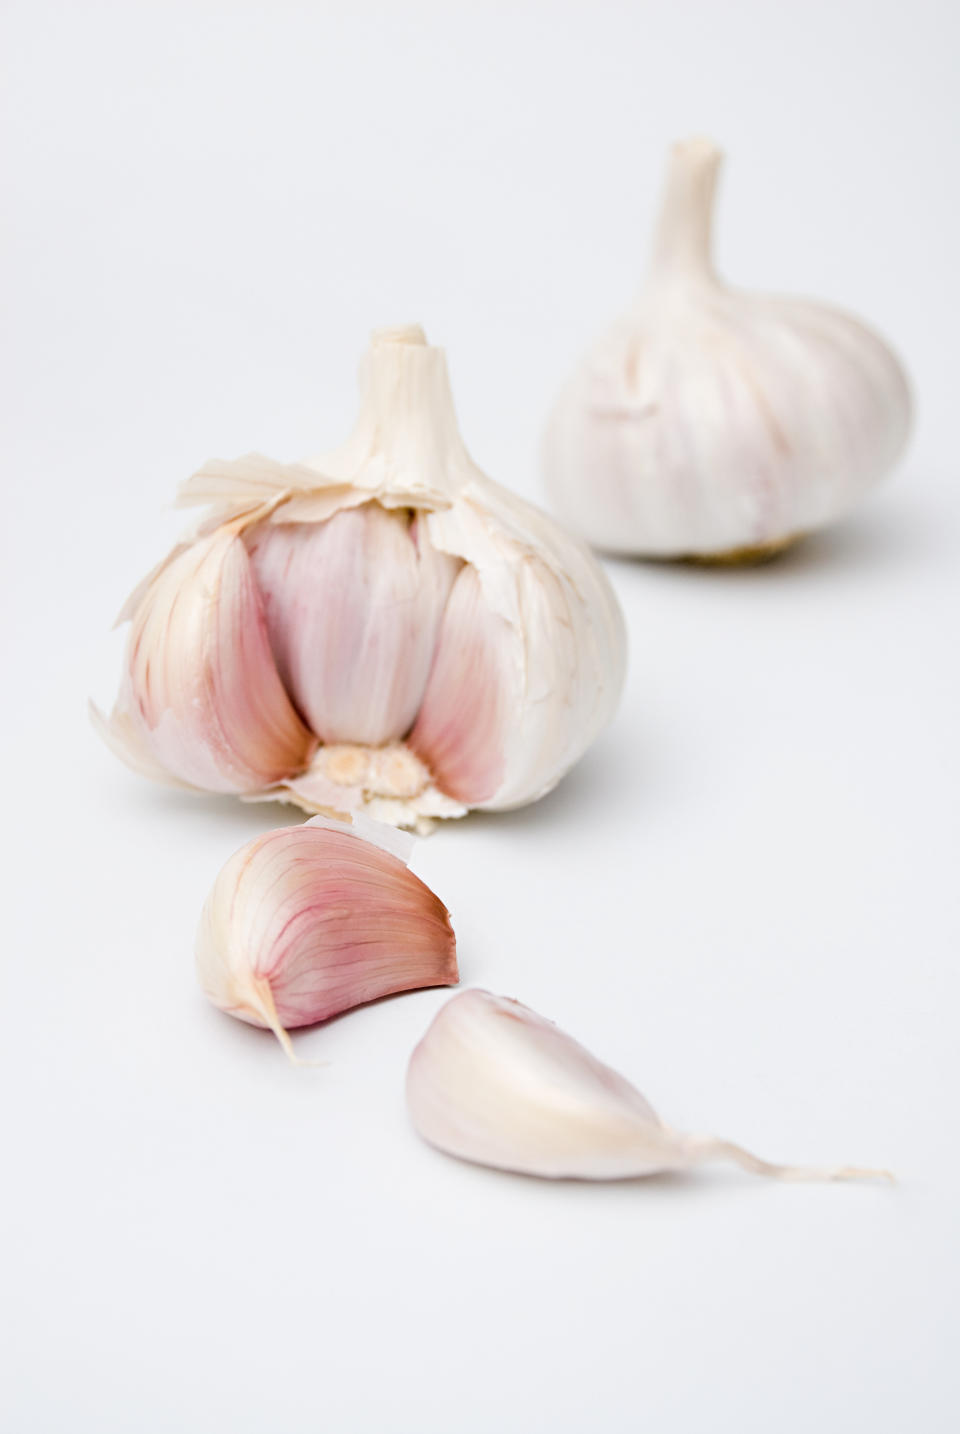 We're not sure why garlic <a href="http://www.thedailybeast.com/articles/2010/02/09/five-aphrodisiac-foods.html" target="_blank">appears on everyone's list</a> of aphrodisiac foods. We see it as more of an obstacle to intimacy. Anyone else?